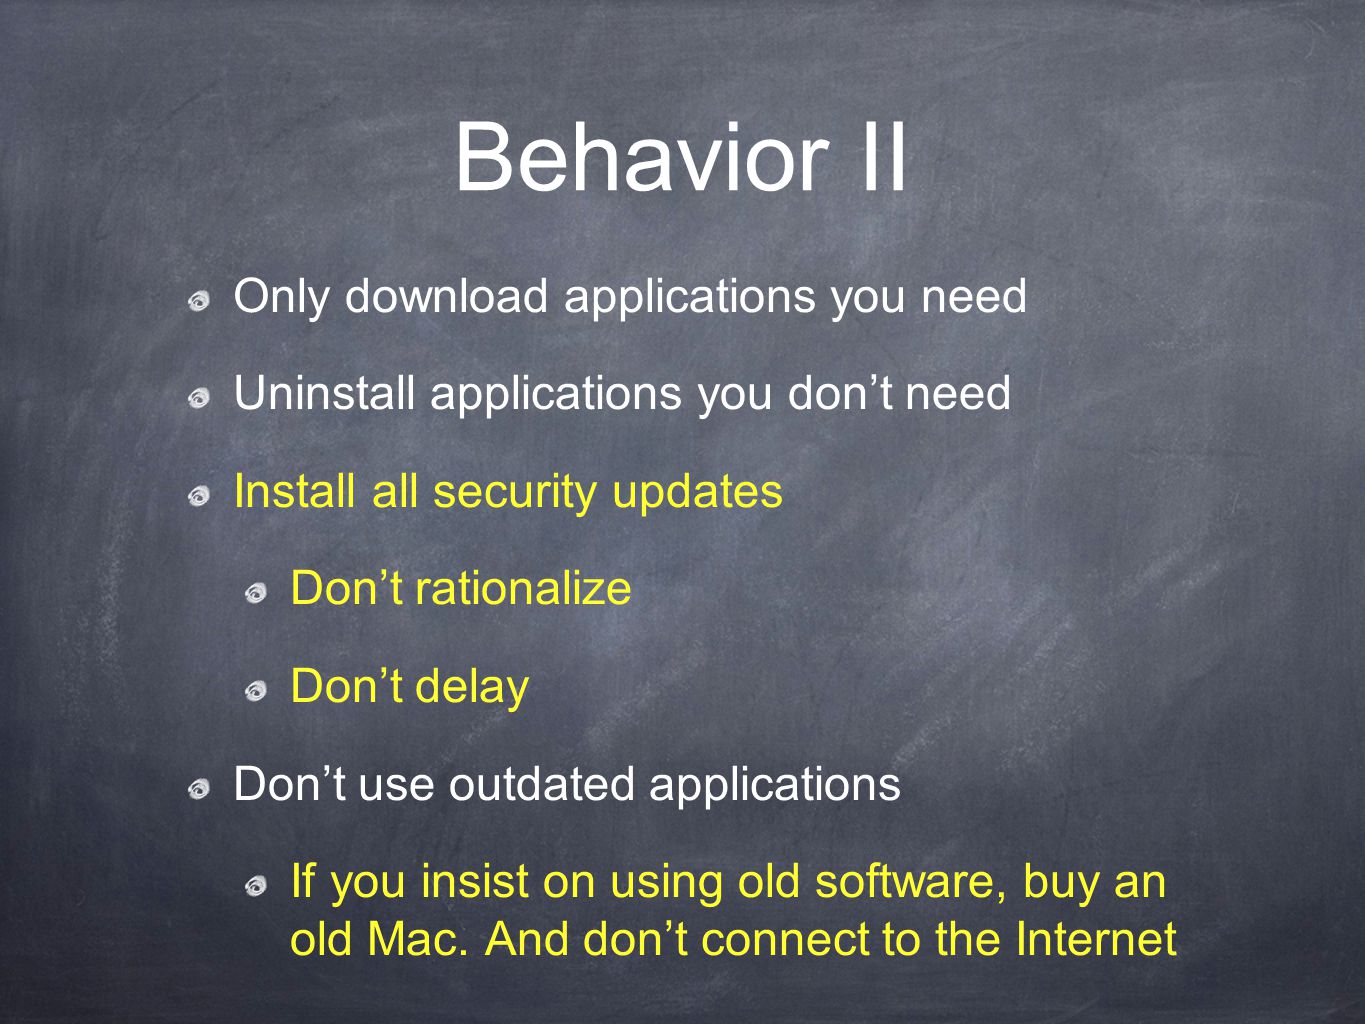 Behavior II Only download applications you need Uninstall applications you don’t need Install all security updates Don’t rationalize Don’t delay Don’t use outdated applications If you insist on using old software, buy an old Mac.